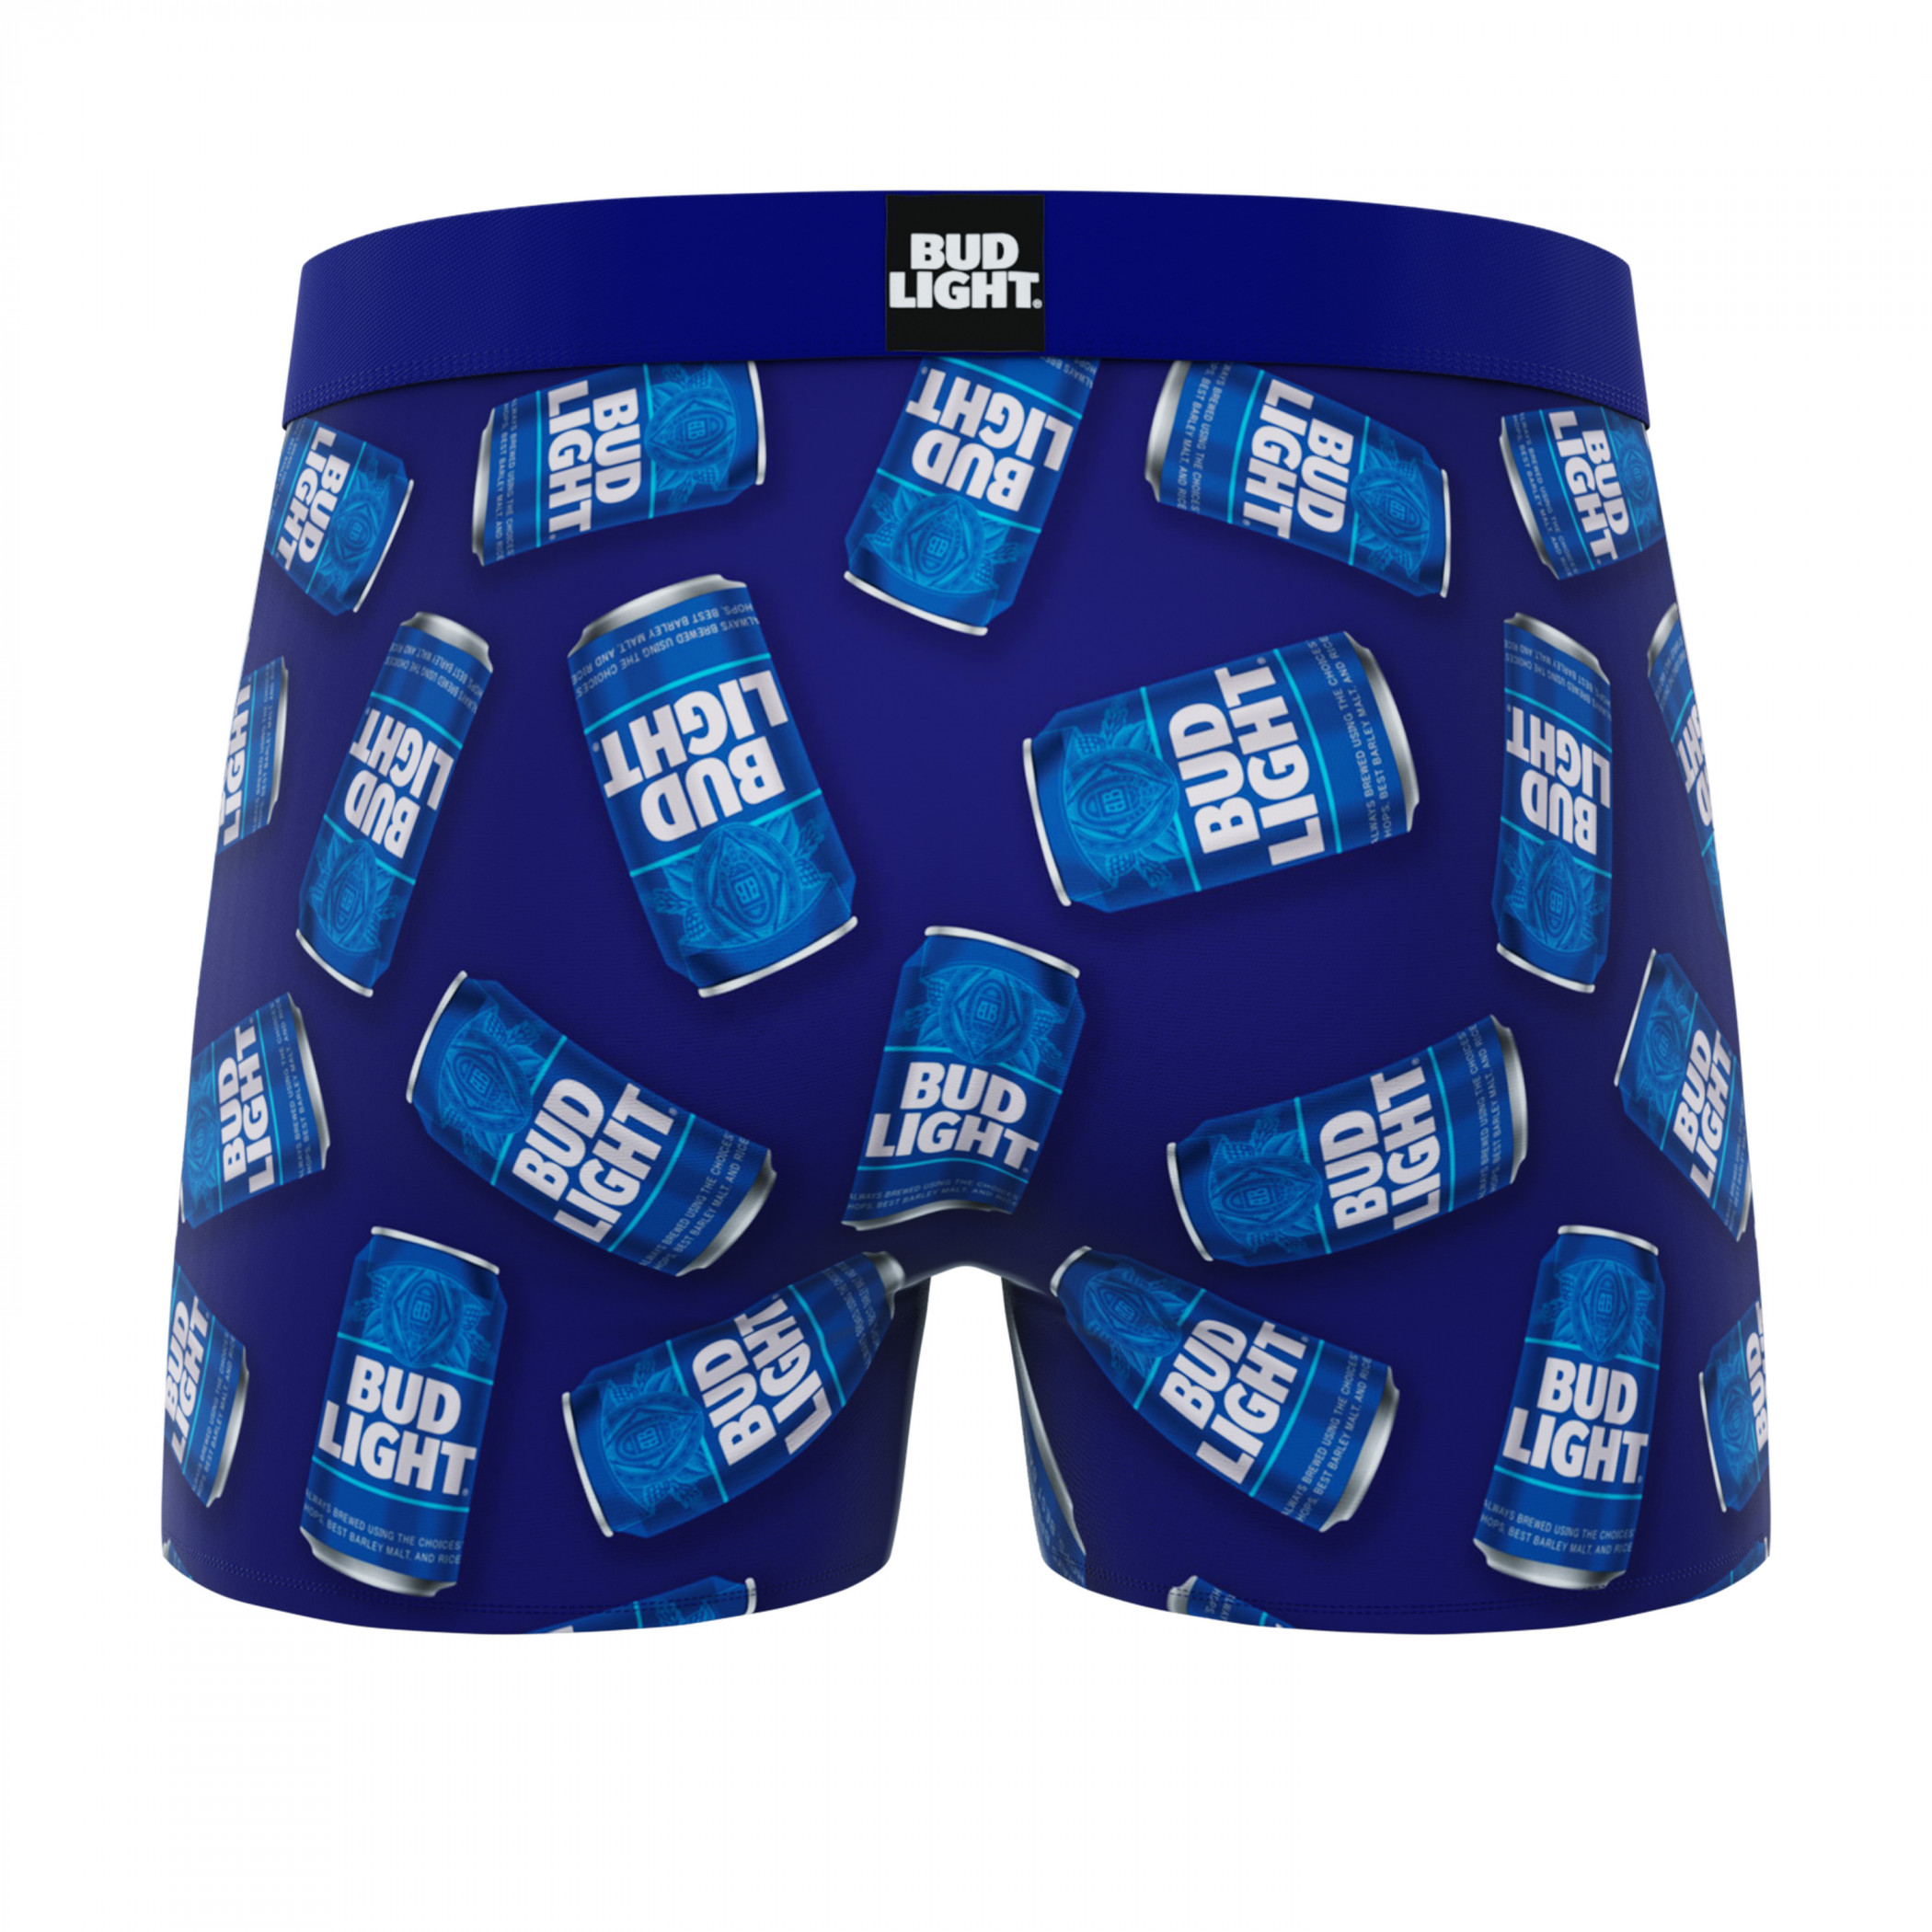 Crazy Boxers Bud Light Cans Boxer Briefs and Socks in Beer Can